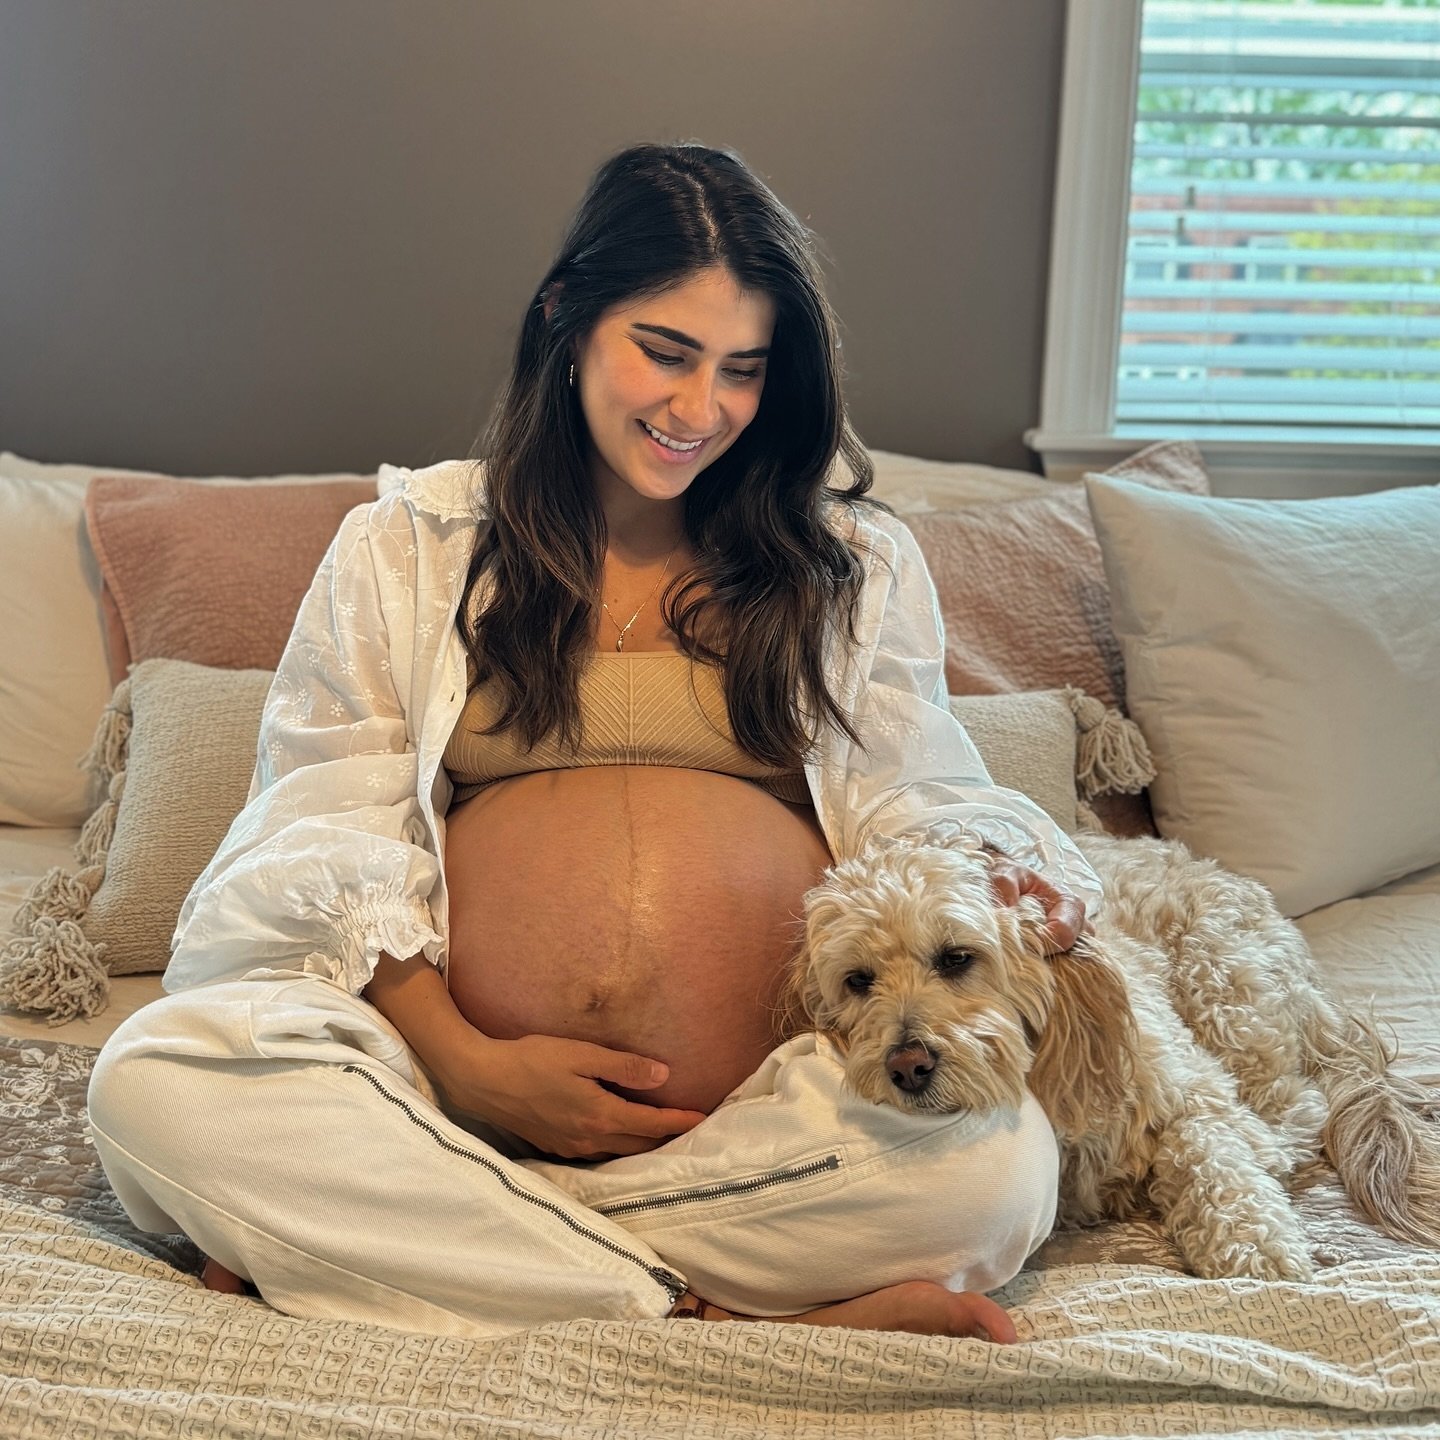 #40weekspregnant ✨

&ldquo;The last days of pregnancy &mdash; sometimes stretching to agonizing weeks &mdash; are a distinct place, time, event, stage. It is a time of in between. Neither here nor there. Your old self and your new self, balanced on t